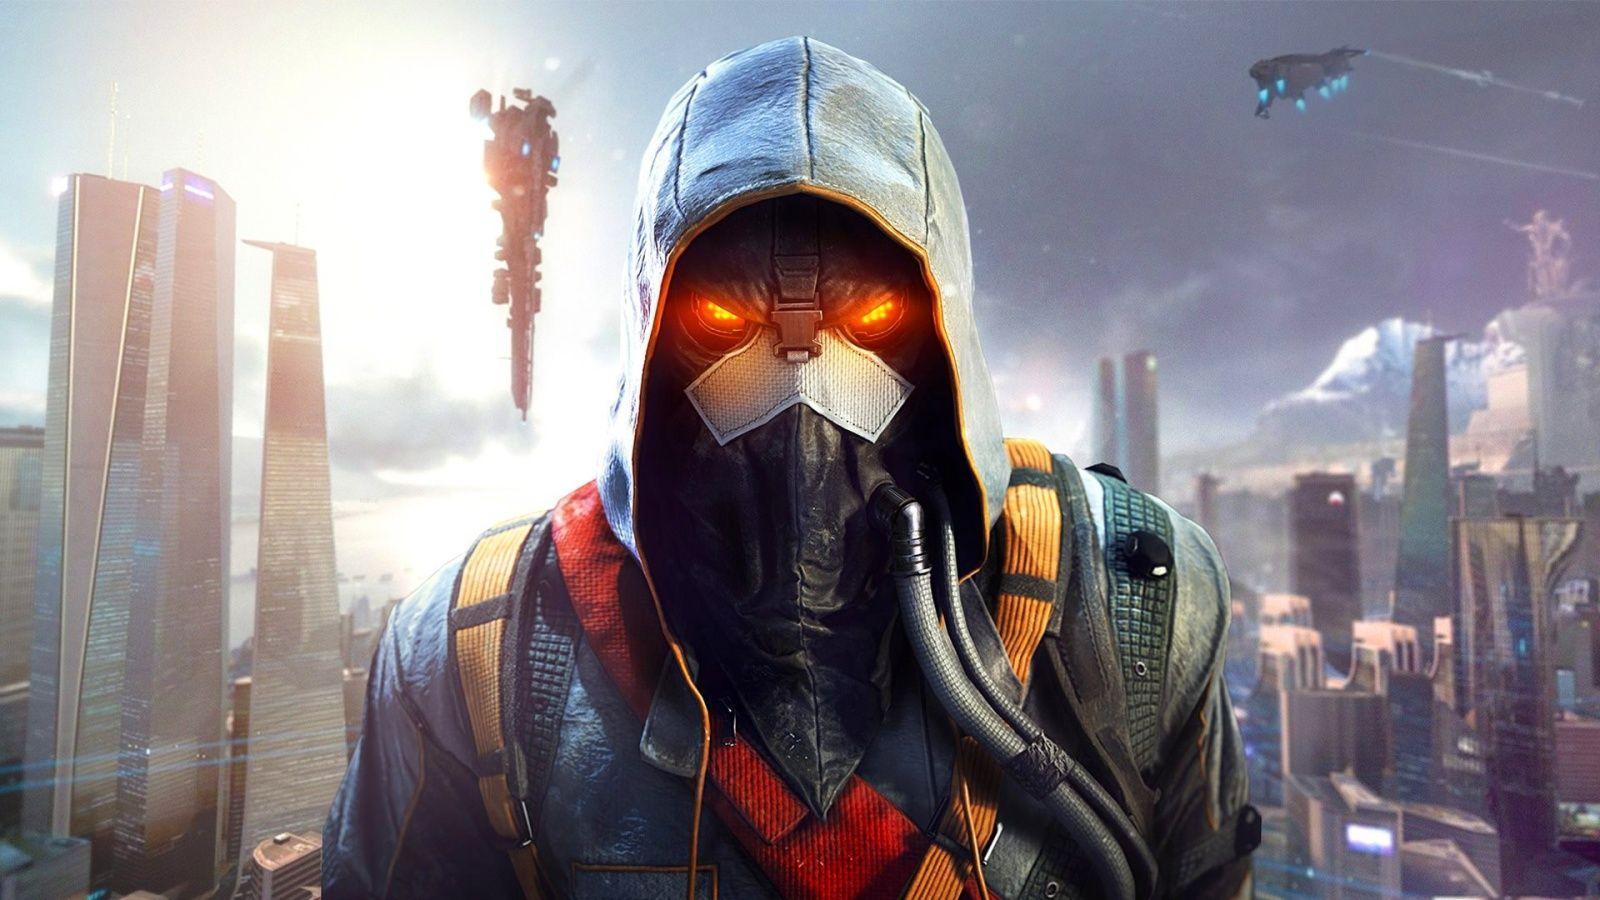 Killzone Shadow Fall for PlayStation 4 widescreen wallpaper. Wide